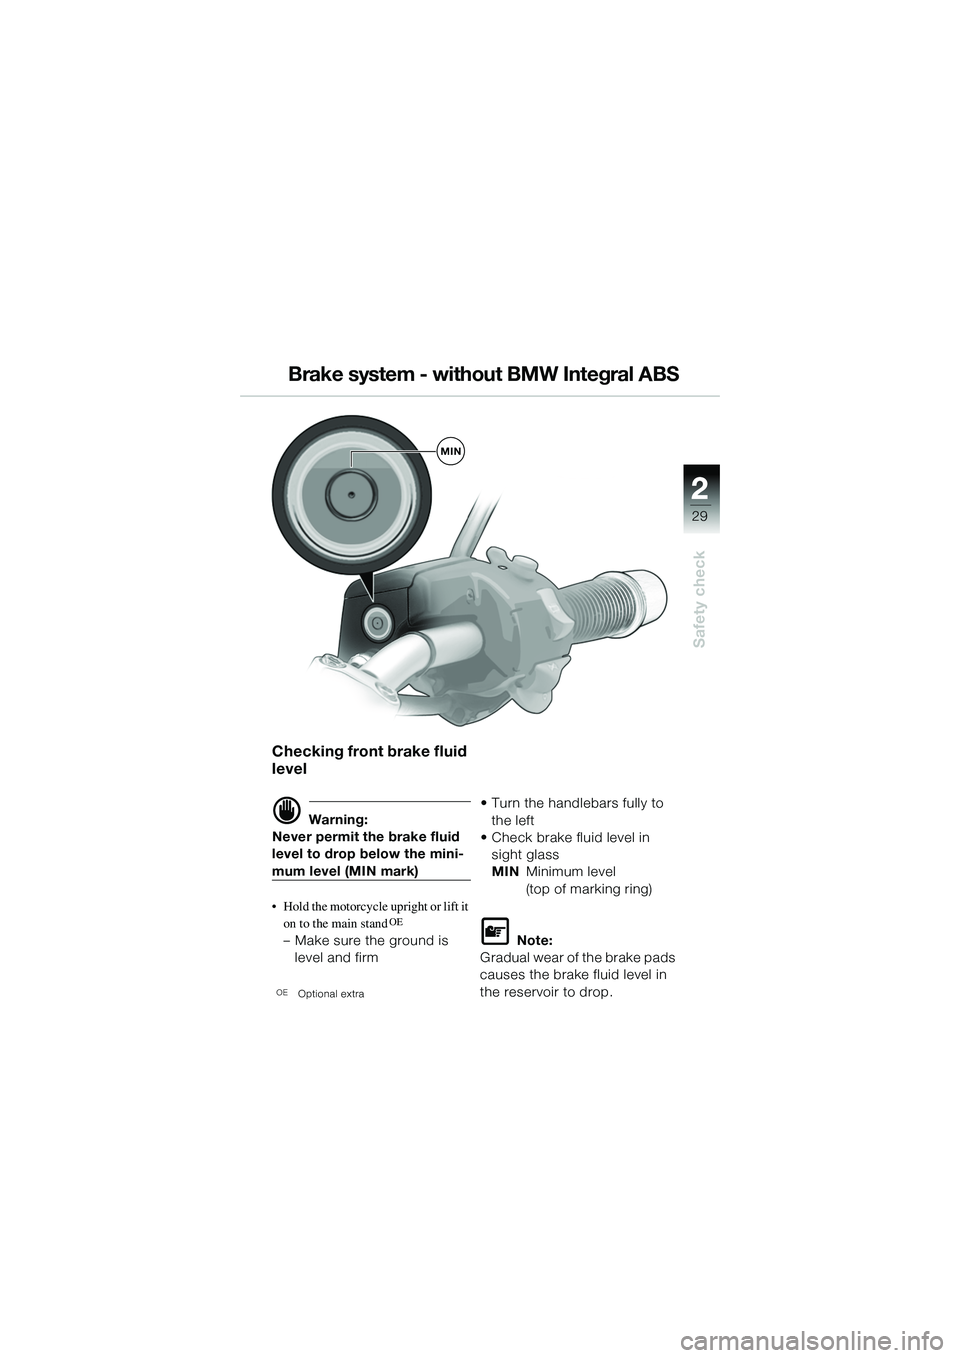 BMW MOTORRAD R 1150 R 2002  Riders Manual (in English) 2
29
2
Safety check
MIN
Checking front brake fluid 
level
d Warning:
Never permit the brake fluid 
level to drop below the mini-
mum level (MIN mark)
• Hold the motorcycle upright or lift it  on to 